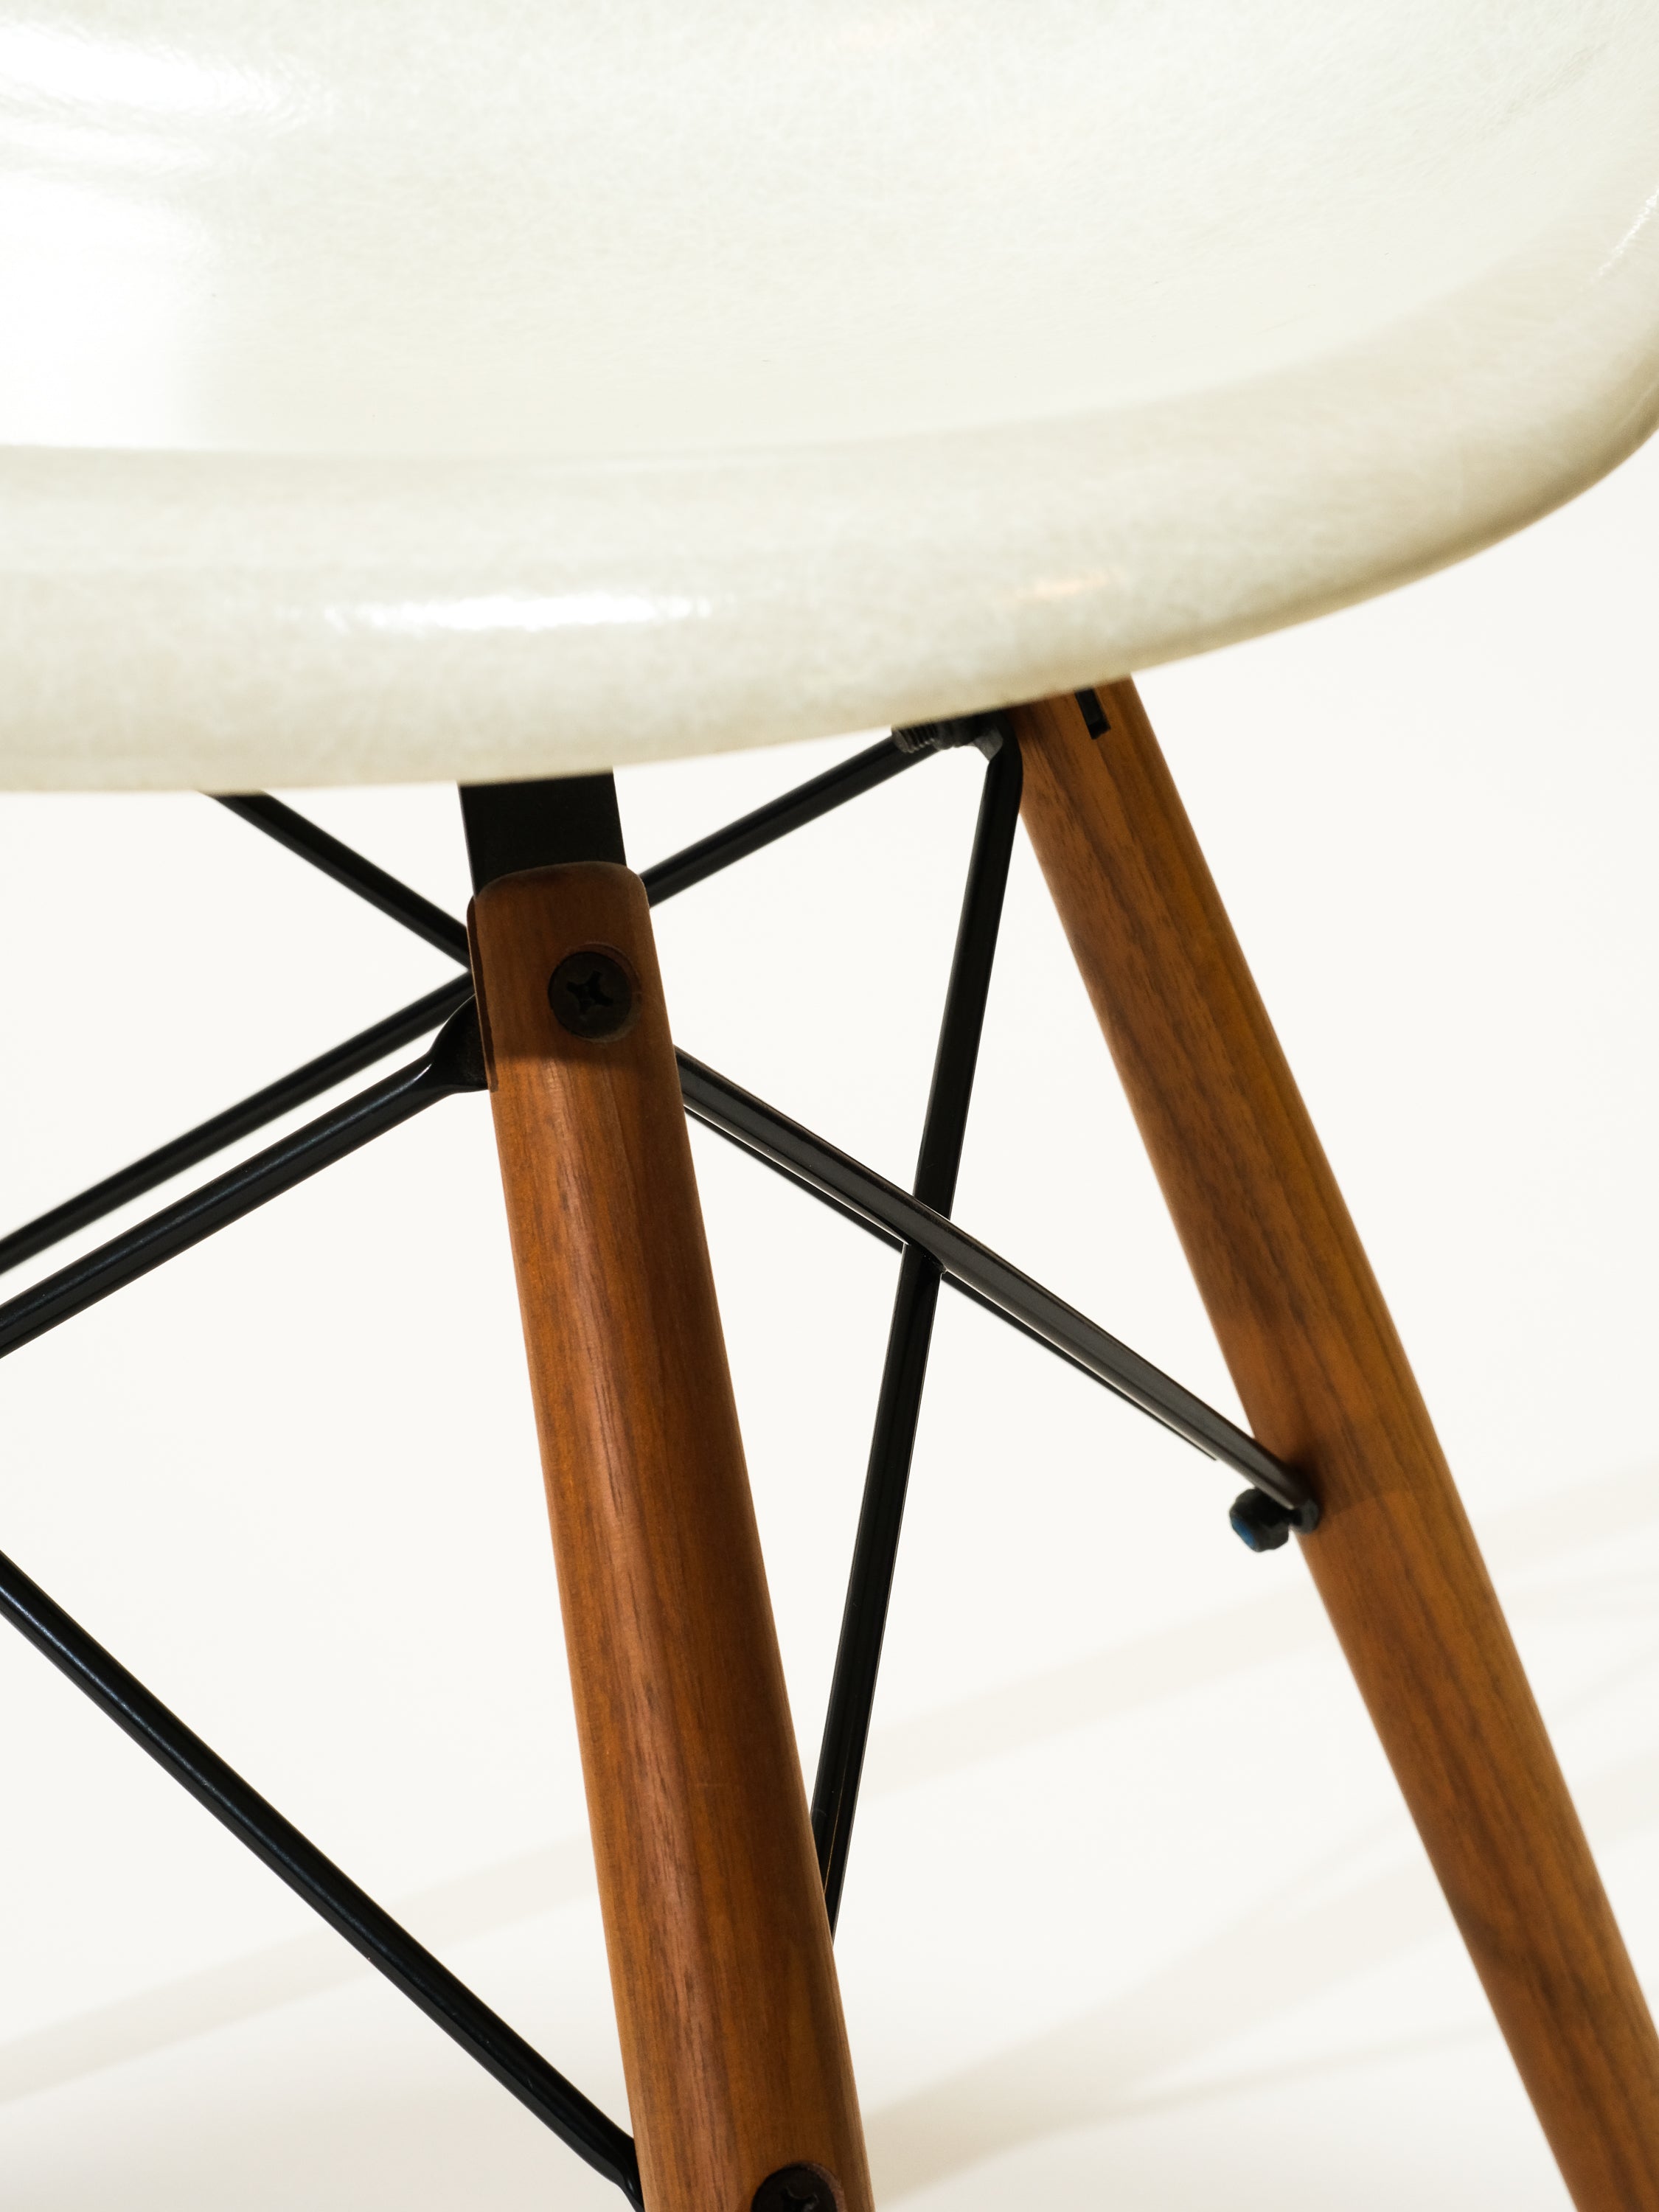 Original DSW Fiberglass Side Chair by Charles & Ray Eames for Herman Miller